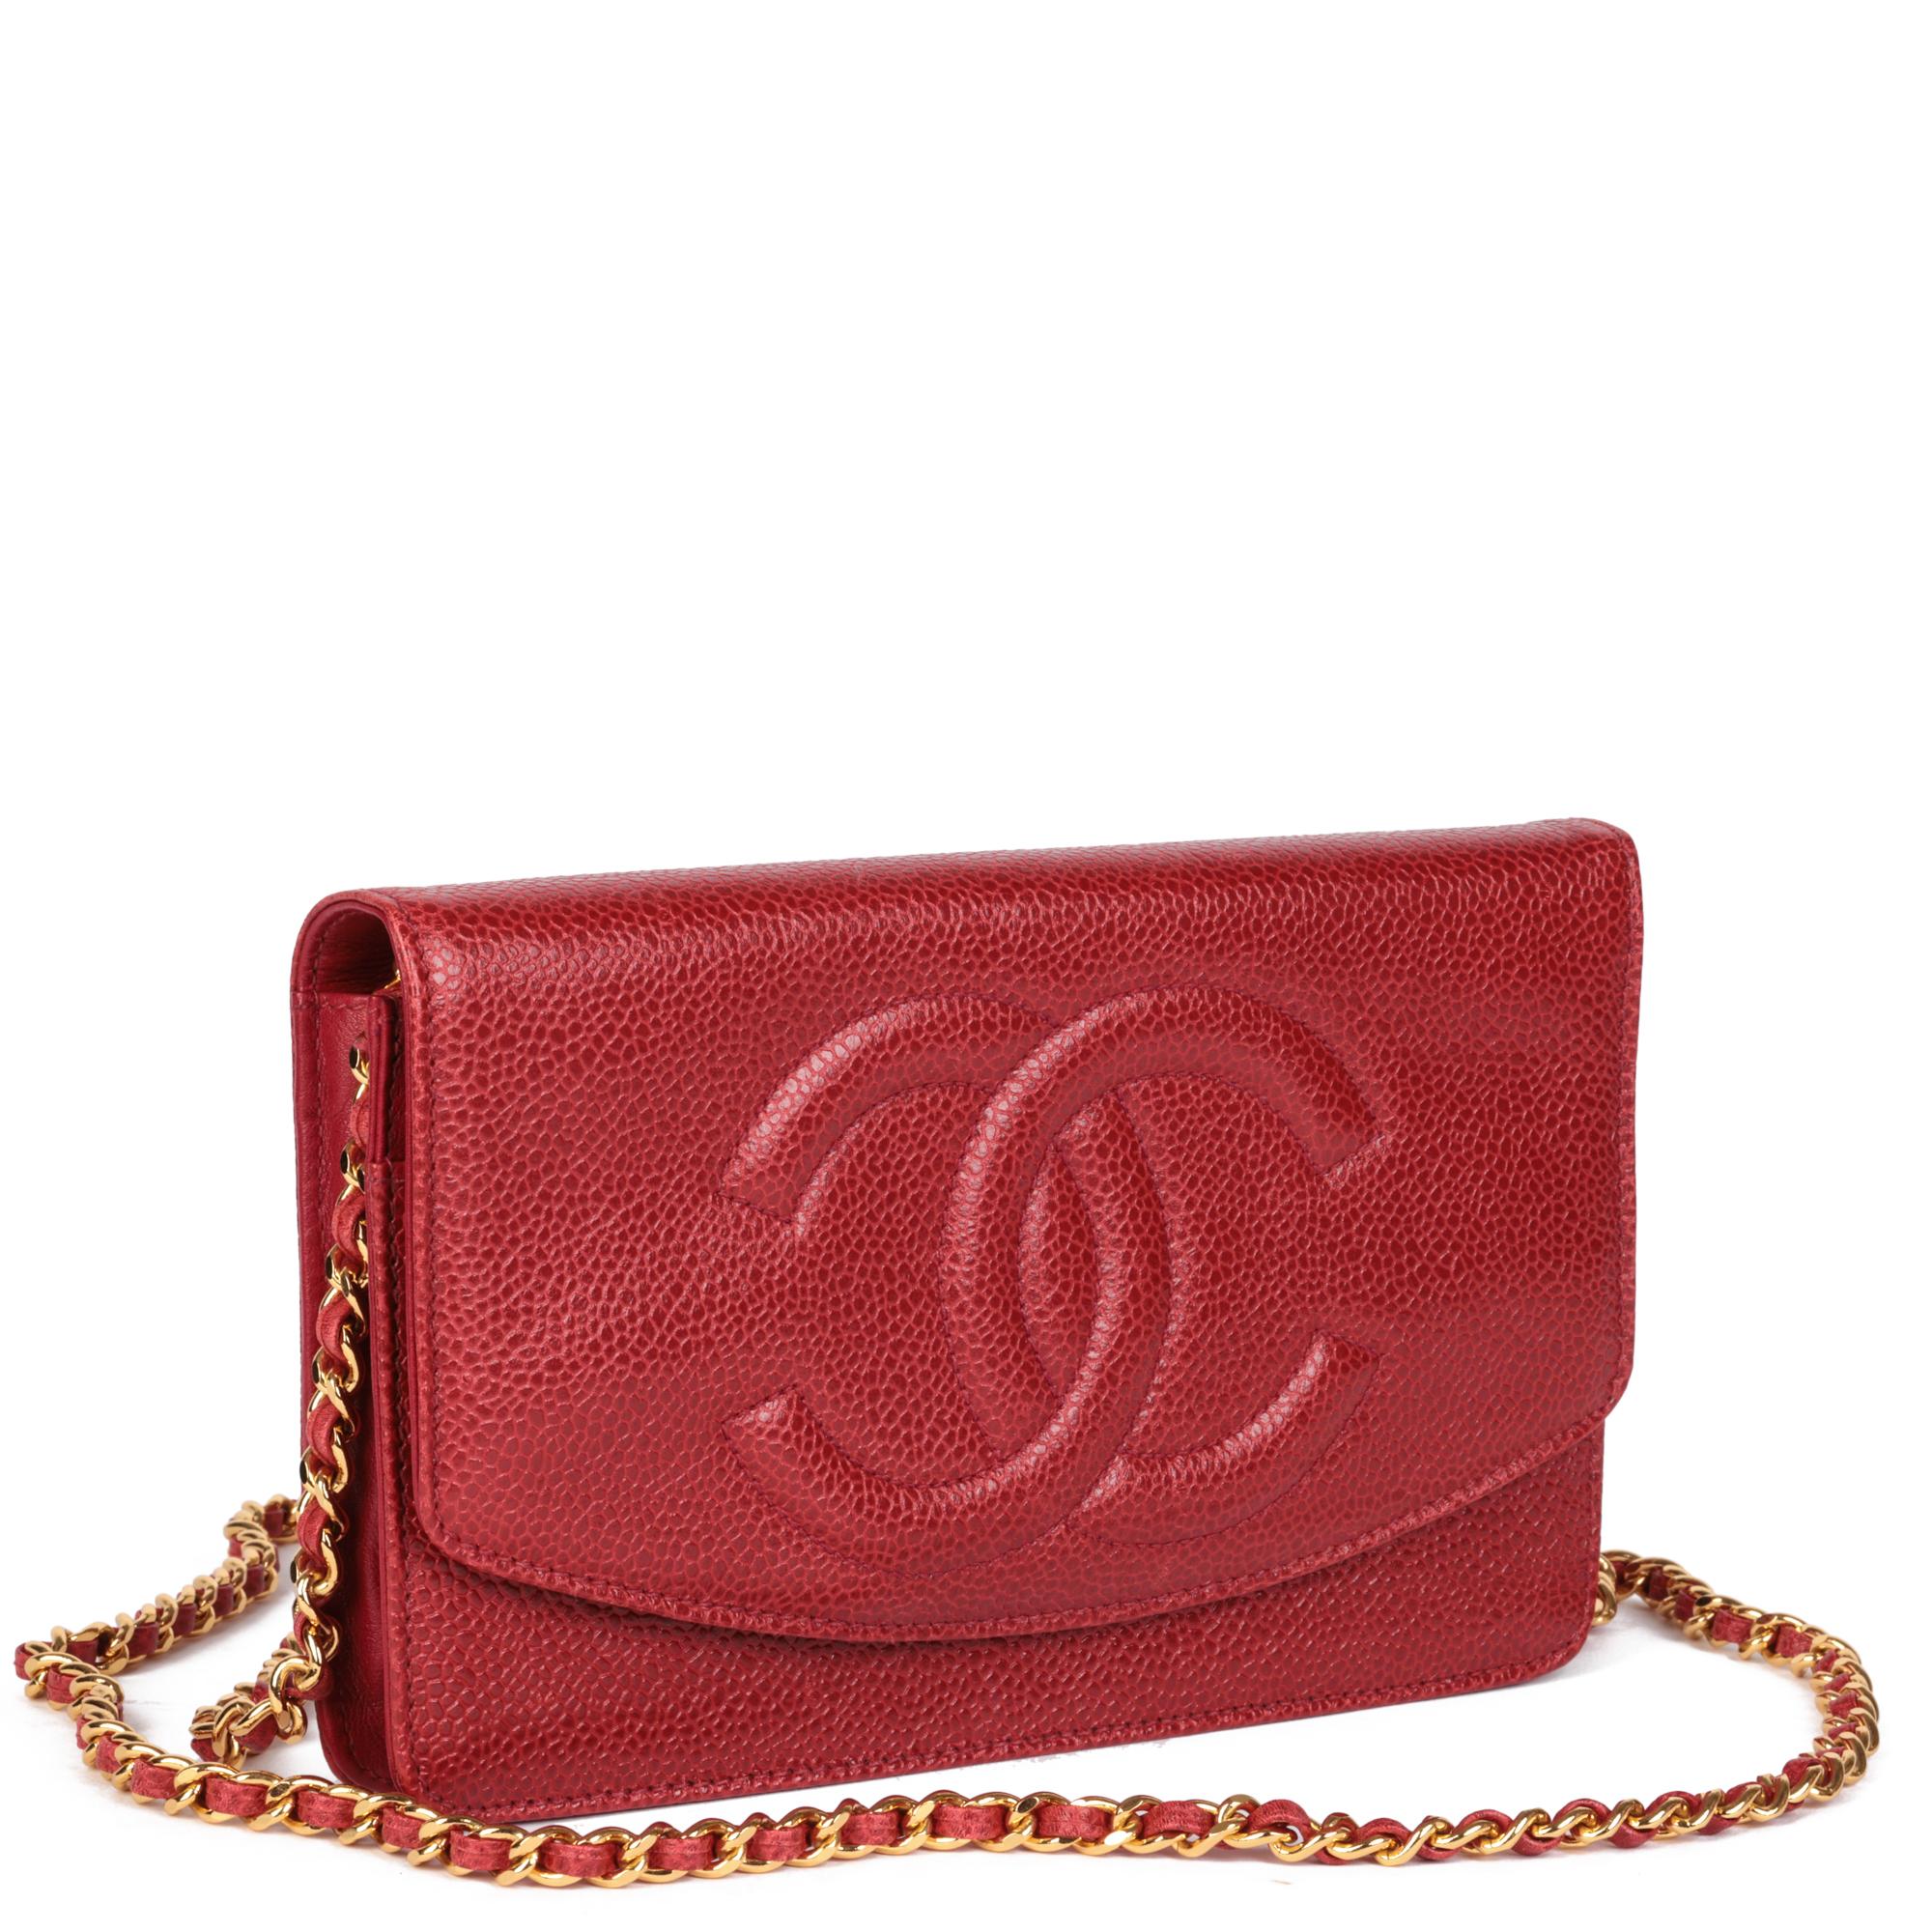 CHANEL
Red Caviar Leather Vintage Timeless Wallet-on-Chain WOC

Serial Number: 3924500
Age (Circa): 1995
Accompanied By: Chanel Dust Bag, Authenticity Card
Authenticity Details: Authenticity Card, Serial Sticker (Made in Italy)
Gender: Ladies
Type: